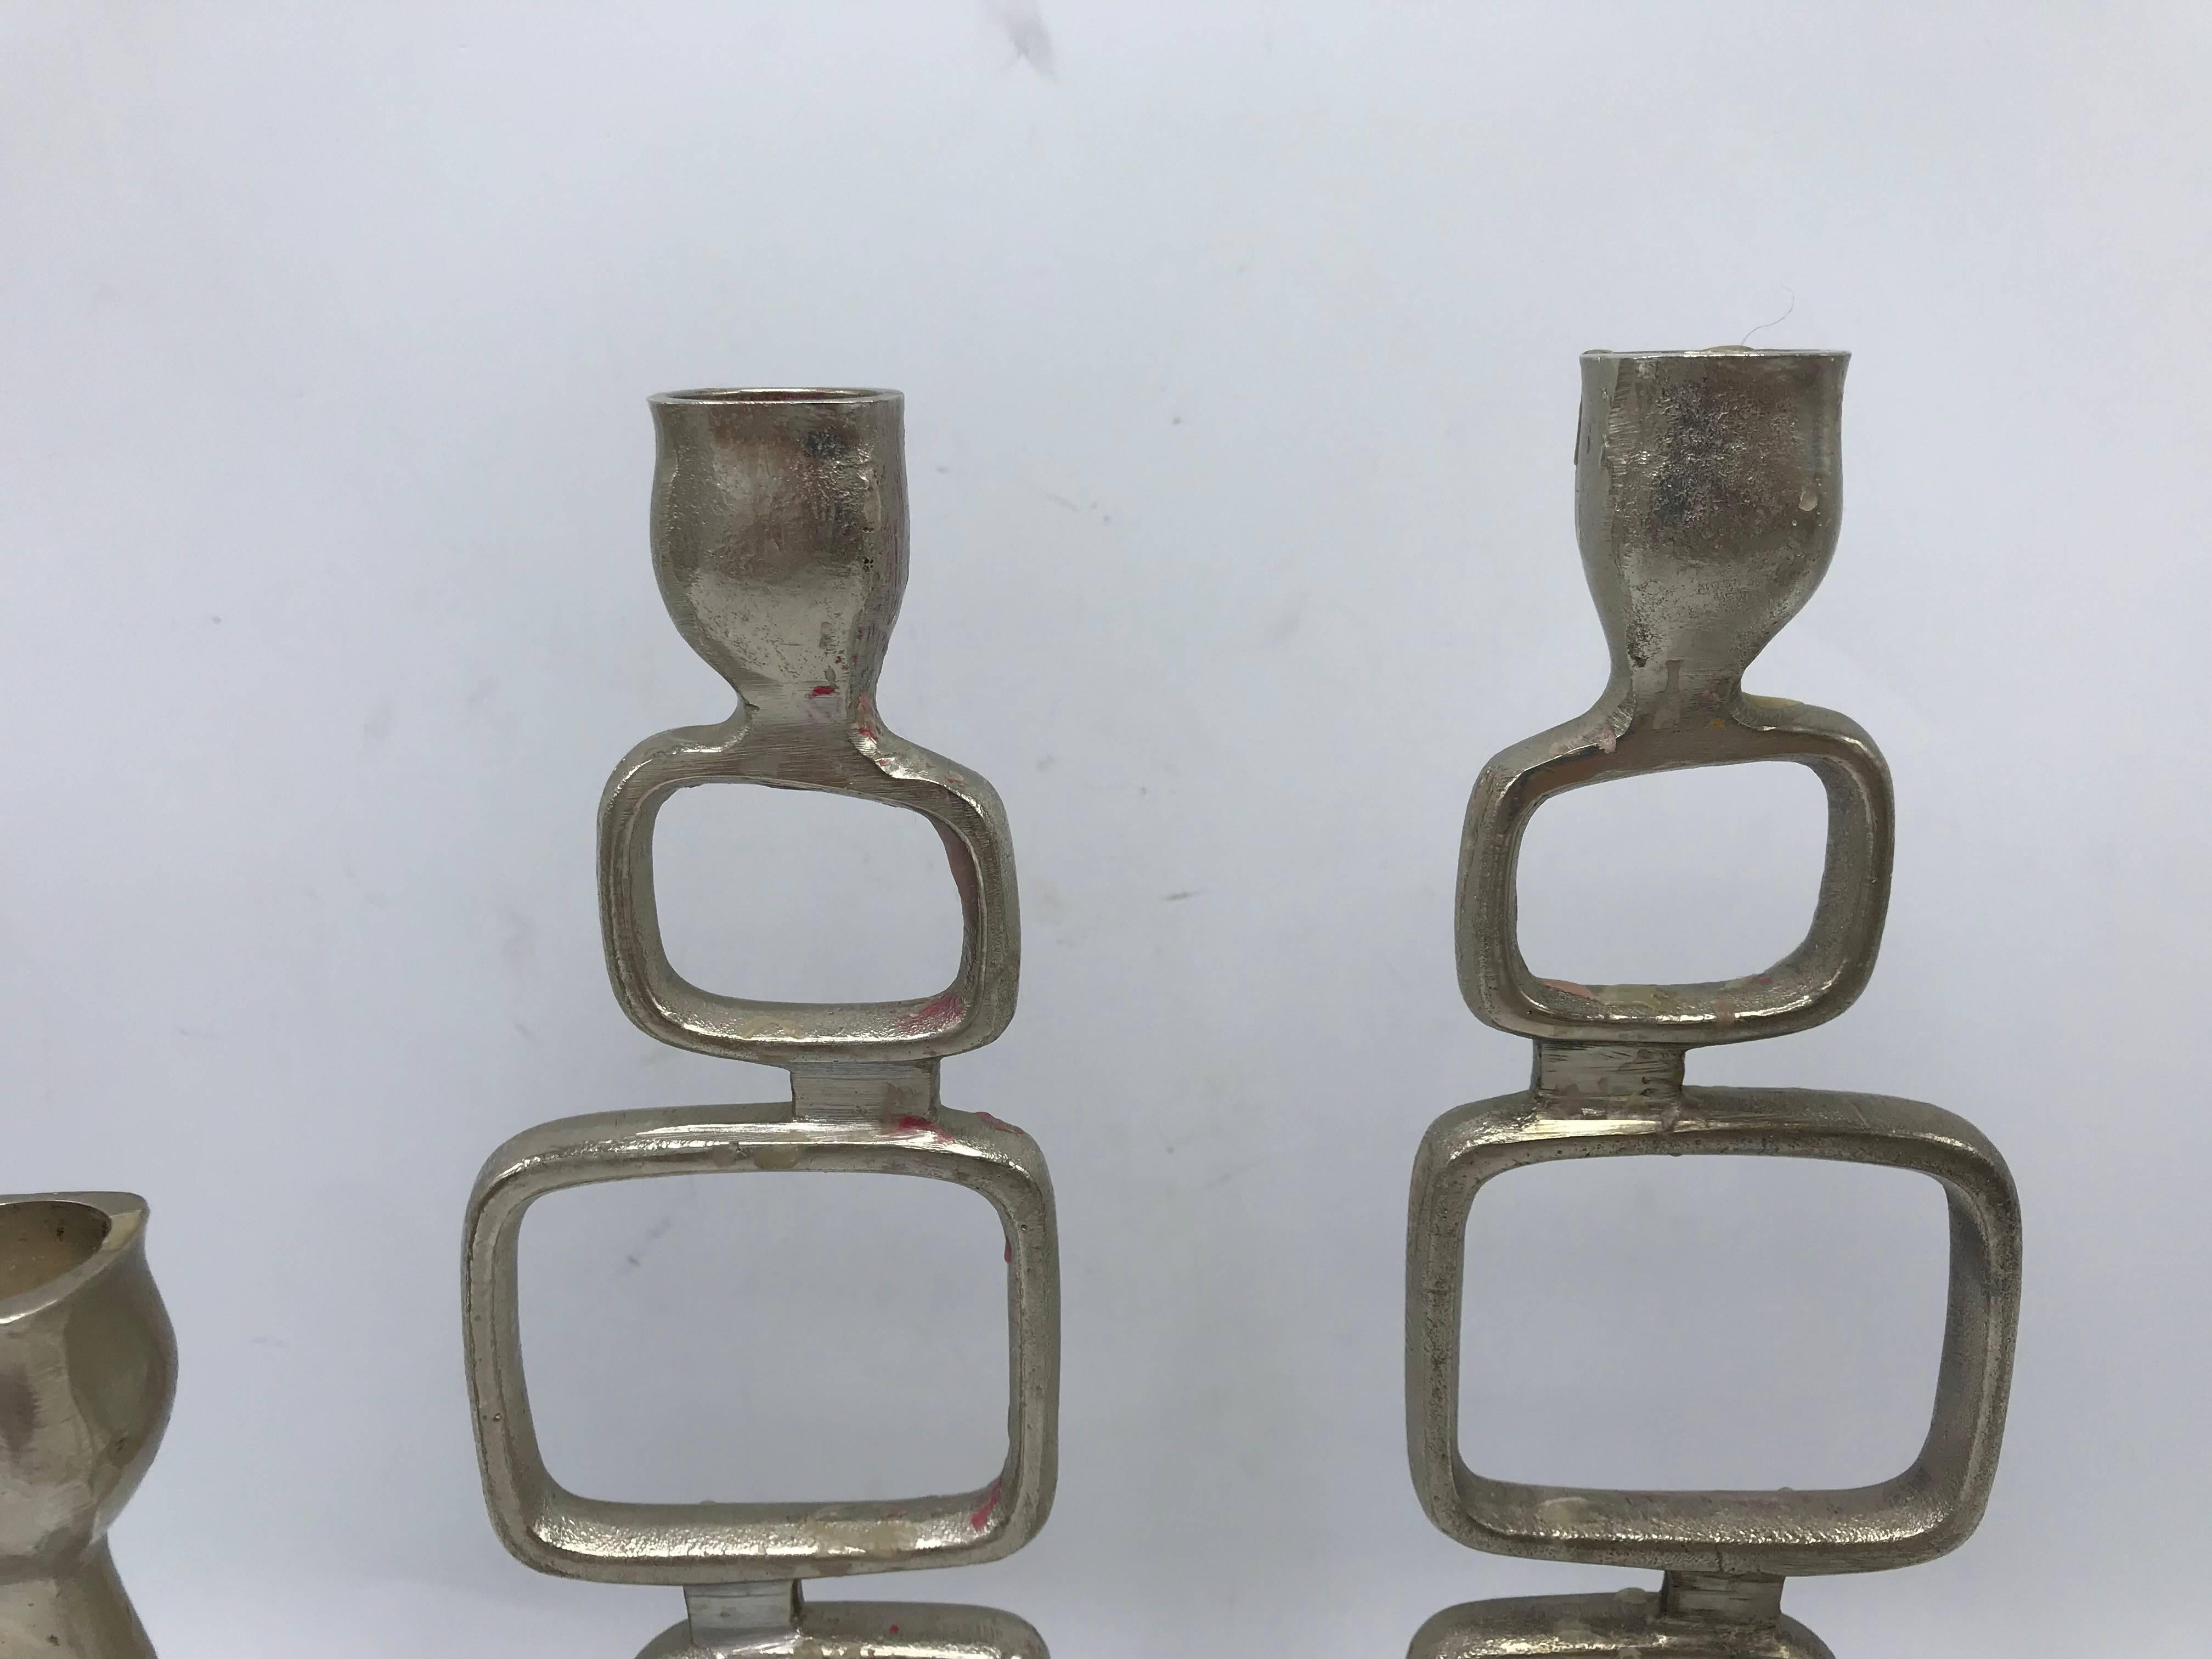 Offered is a fabulous, set of four, 1970s Italian steel-aluminum candlestick holders. Two large, two small. Perfect for a table setting or mantle. 

Large: 3.5